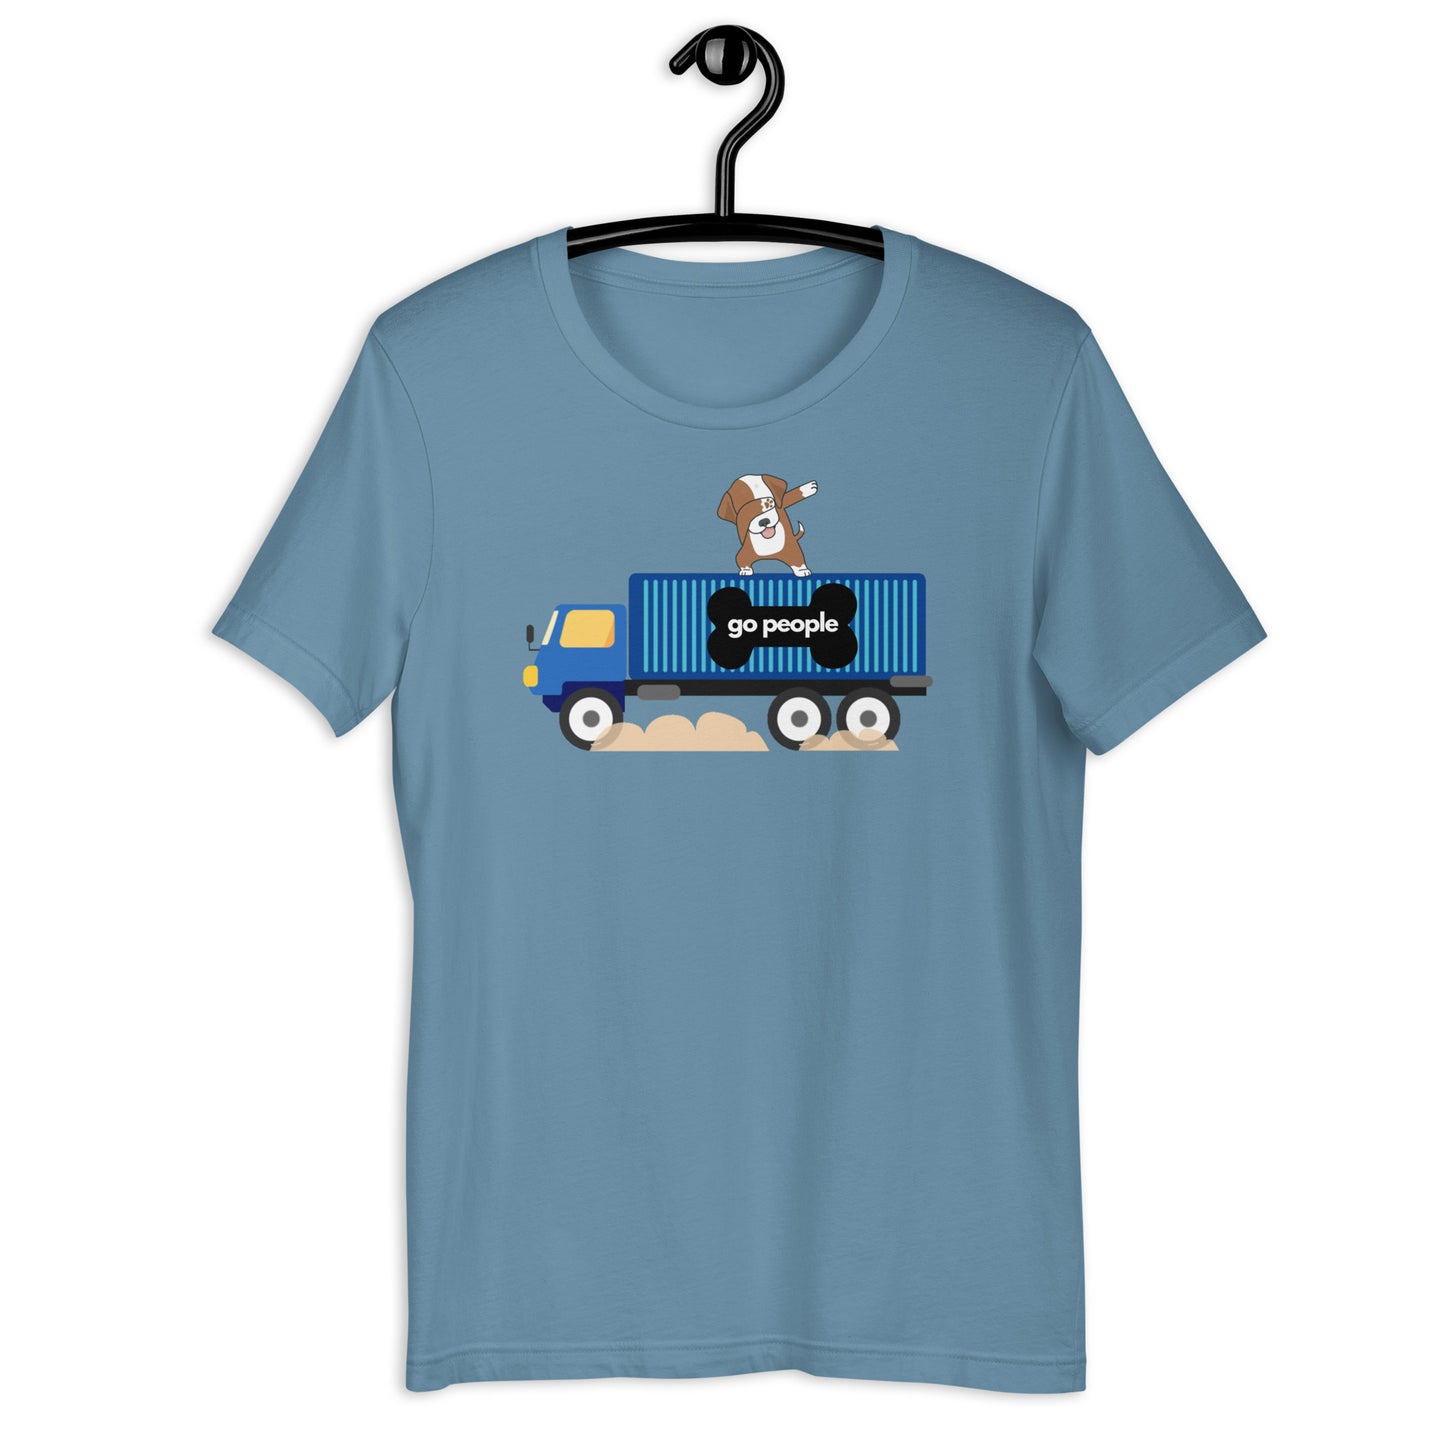 TruckDog & the Go People T-Shirt